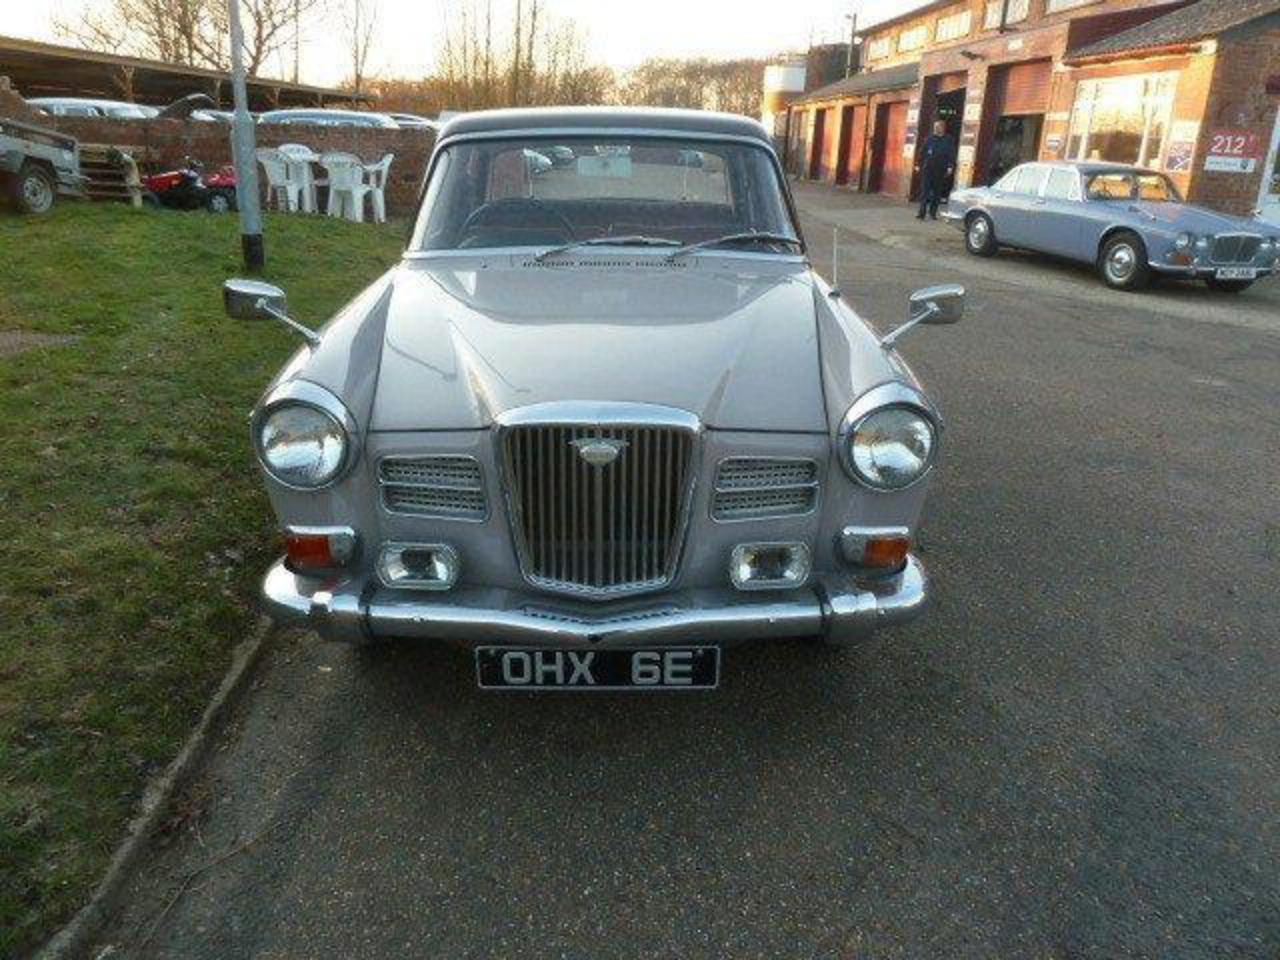 Wolseley 450 Photo Gallery: Photo #08 out of 7, Image Size - 400 x ...